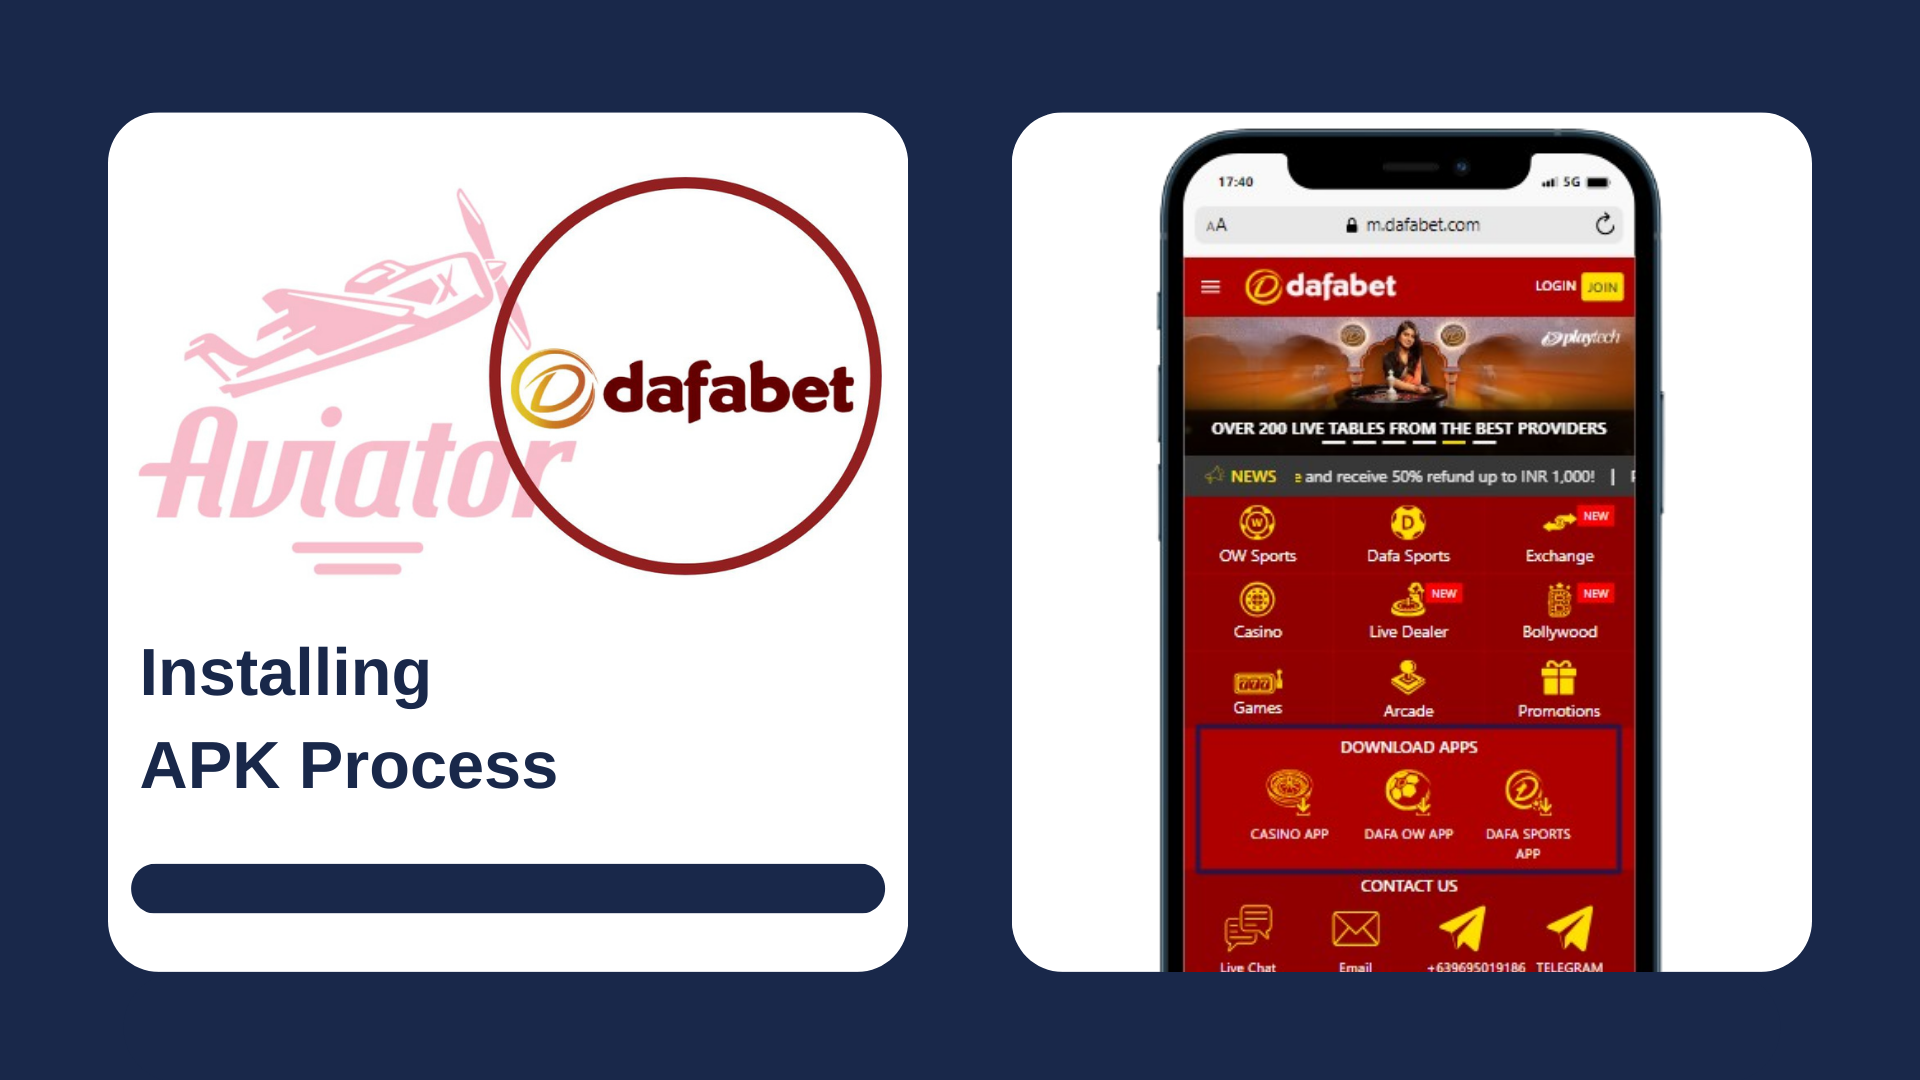 First picture showing Aviator and Dafabet logos with text, and second - highlighted casino app